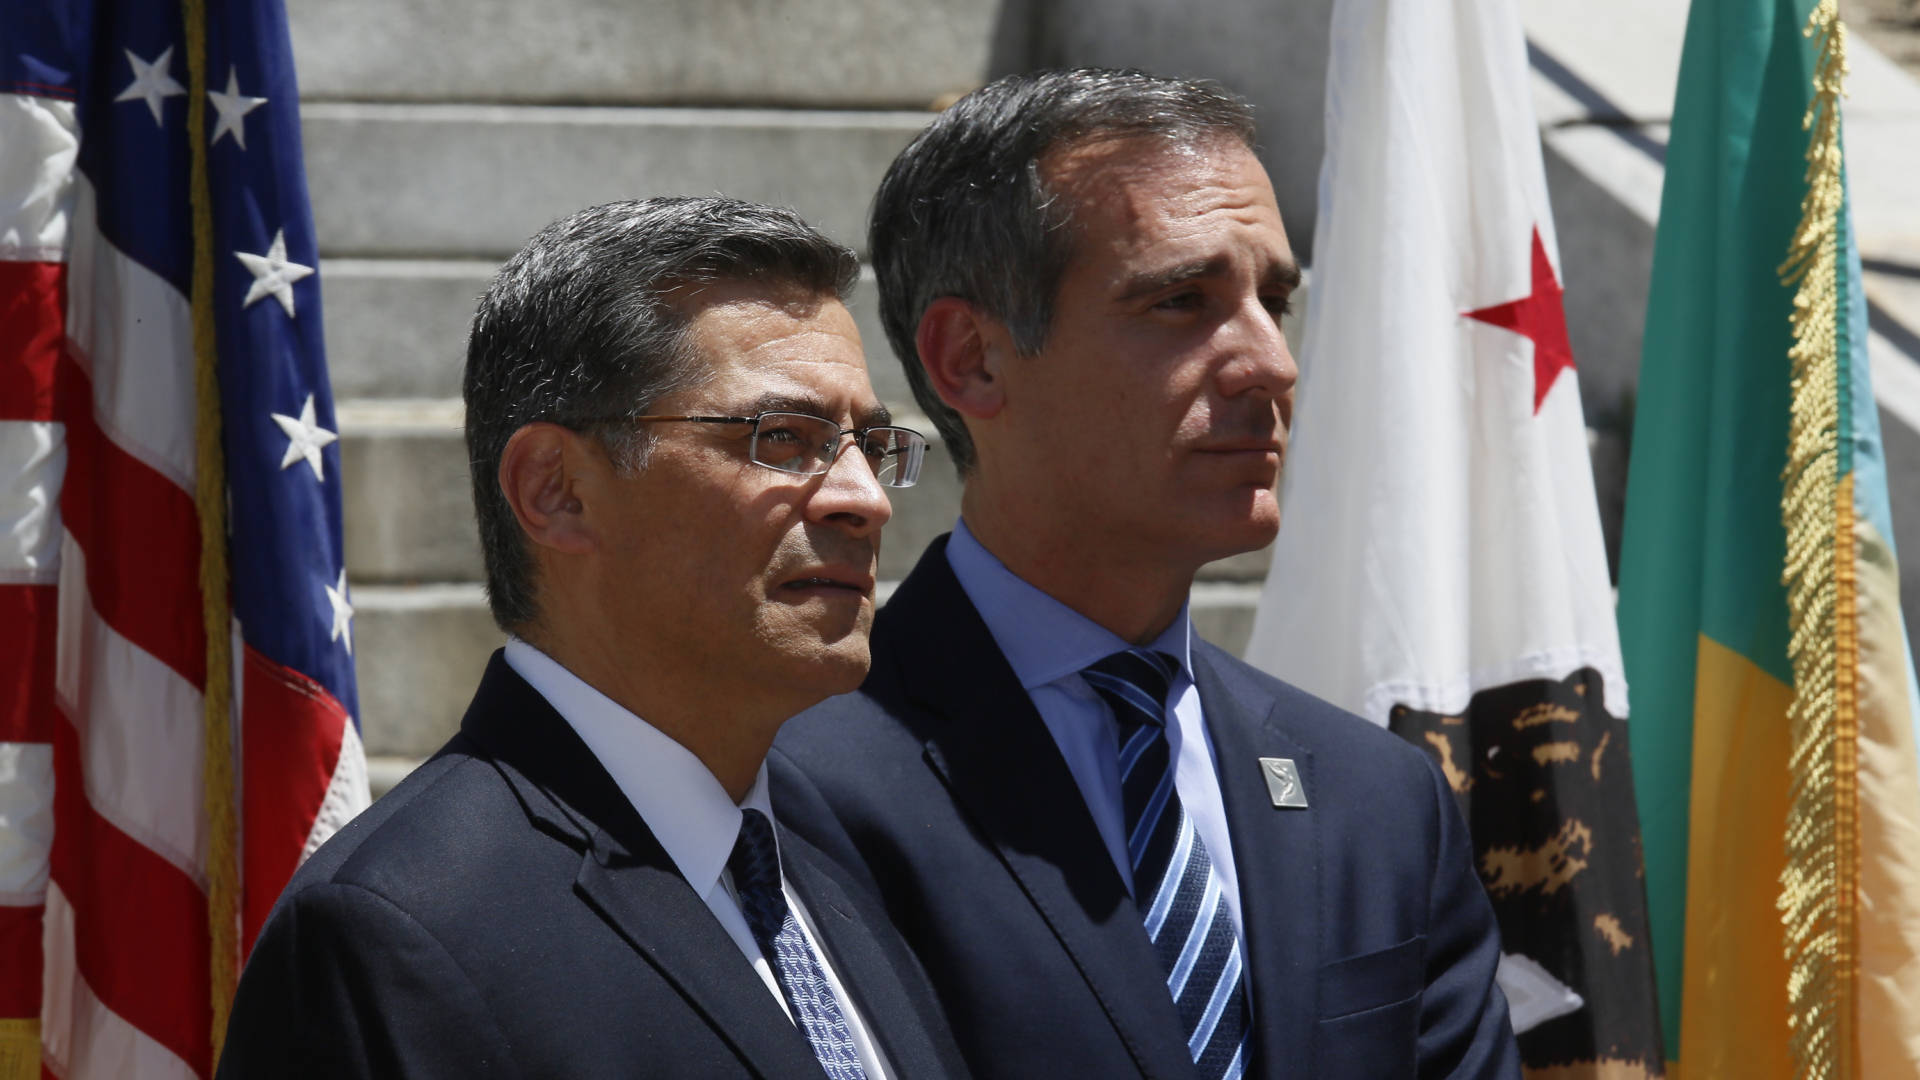 California Attorney General Xavier Becerra (left) and Los Angeles Mayor Eric Garcetti announced the city and county of Los Angeles, plus four other cities, were joining California's lawsuit over the 2020 census citizenship question in May. Damian Dovarganes/AP